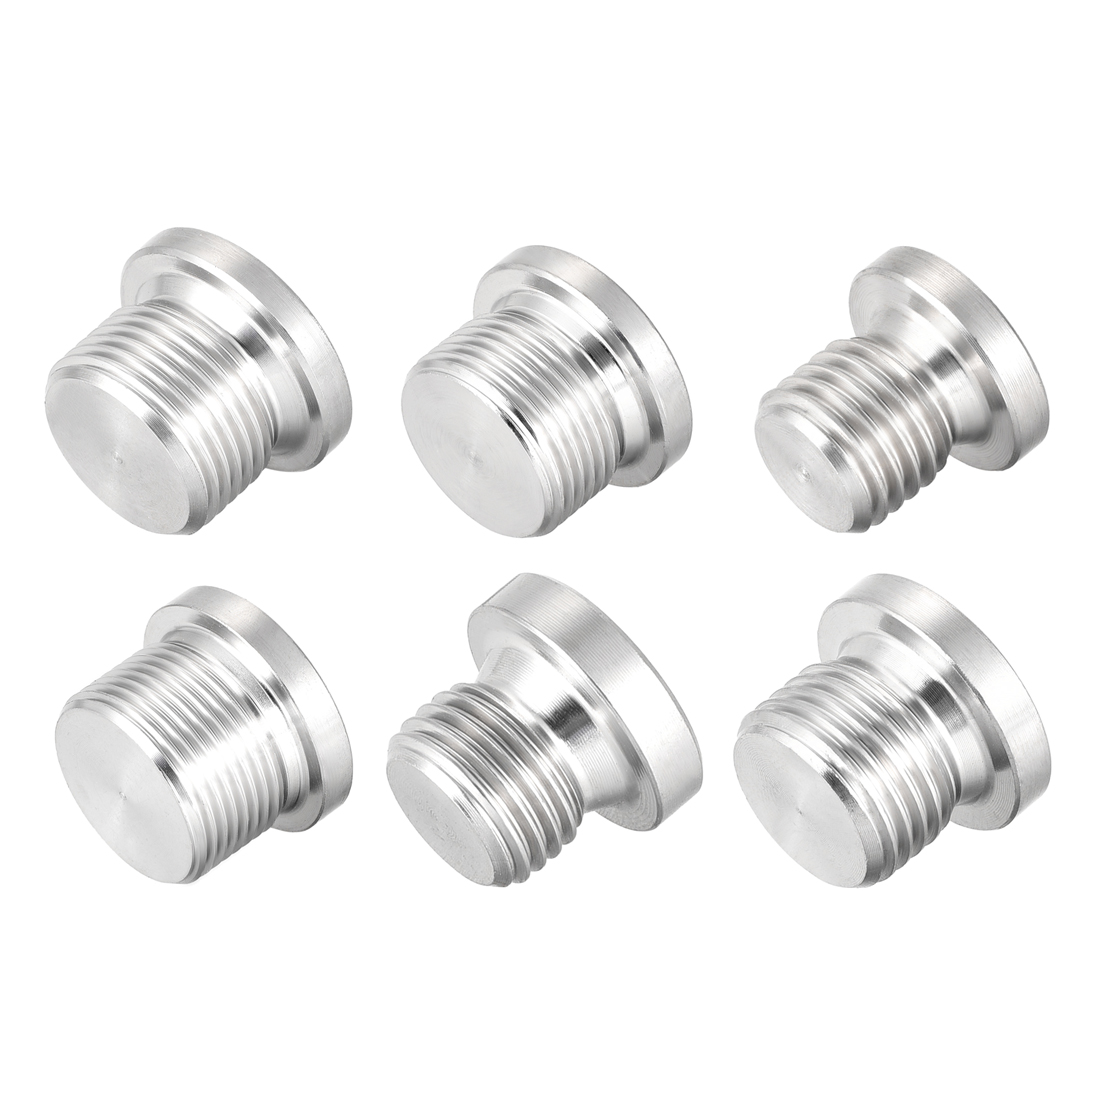 uxcell 1-3pcs Countersunk Plug Internal Hex Head Socket w Flange M10x1 M12-M24x1.5 Male Stainless Steel Pipe Fitting Thread